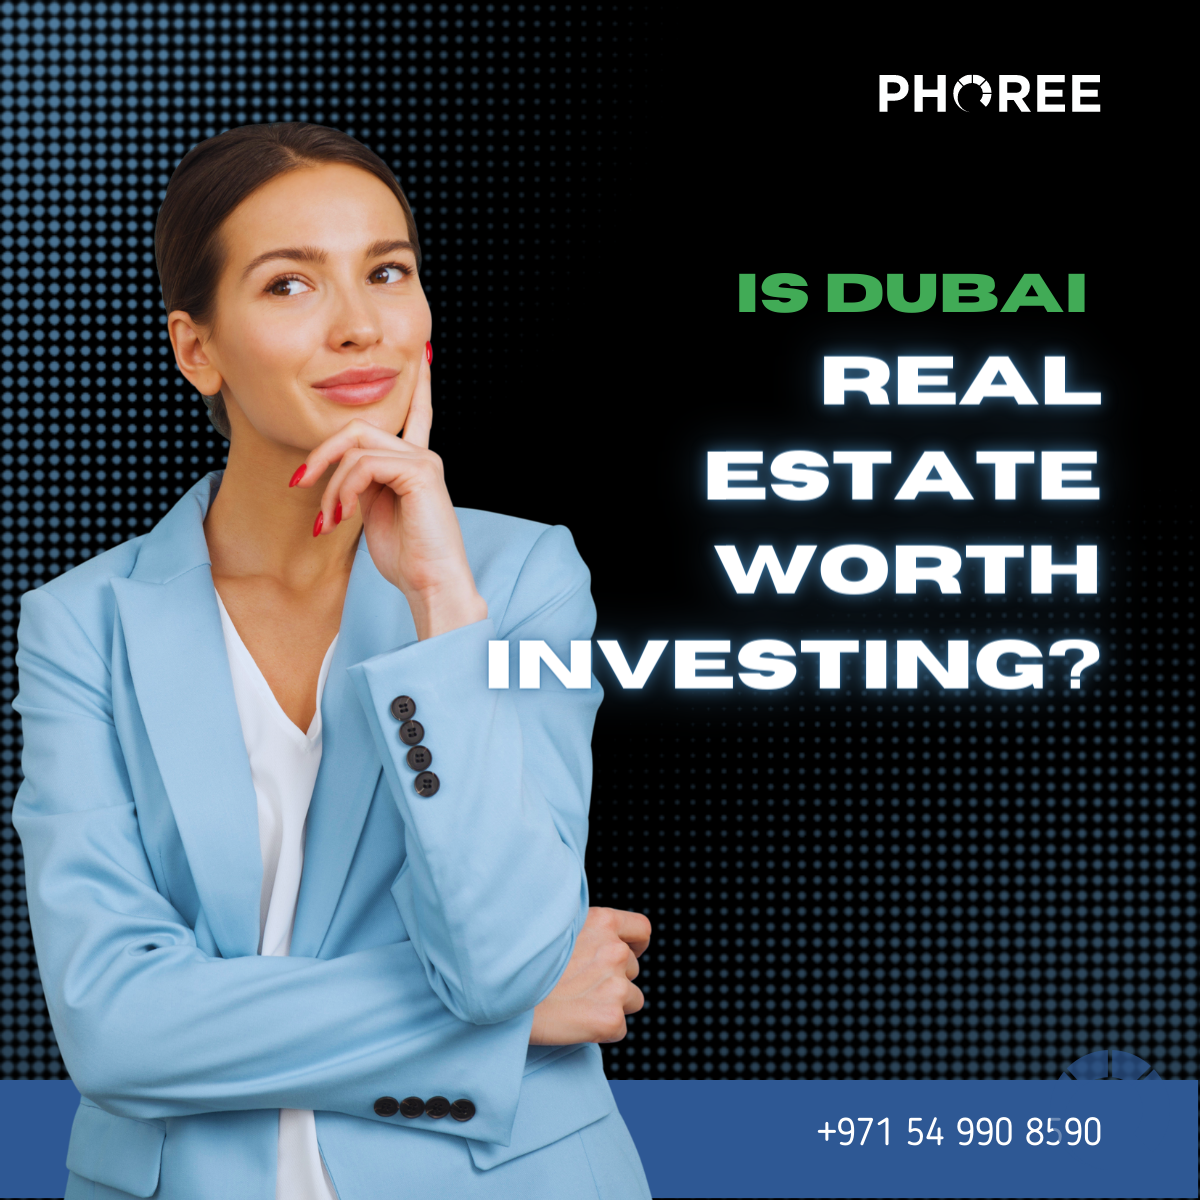 REAL ESTATE WORTH INVESTING